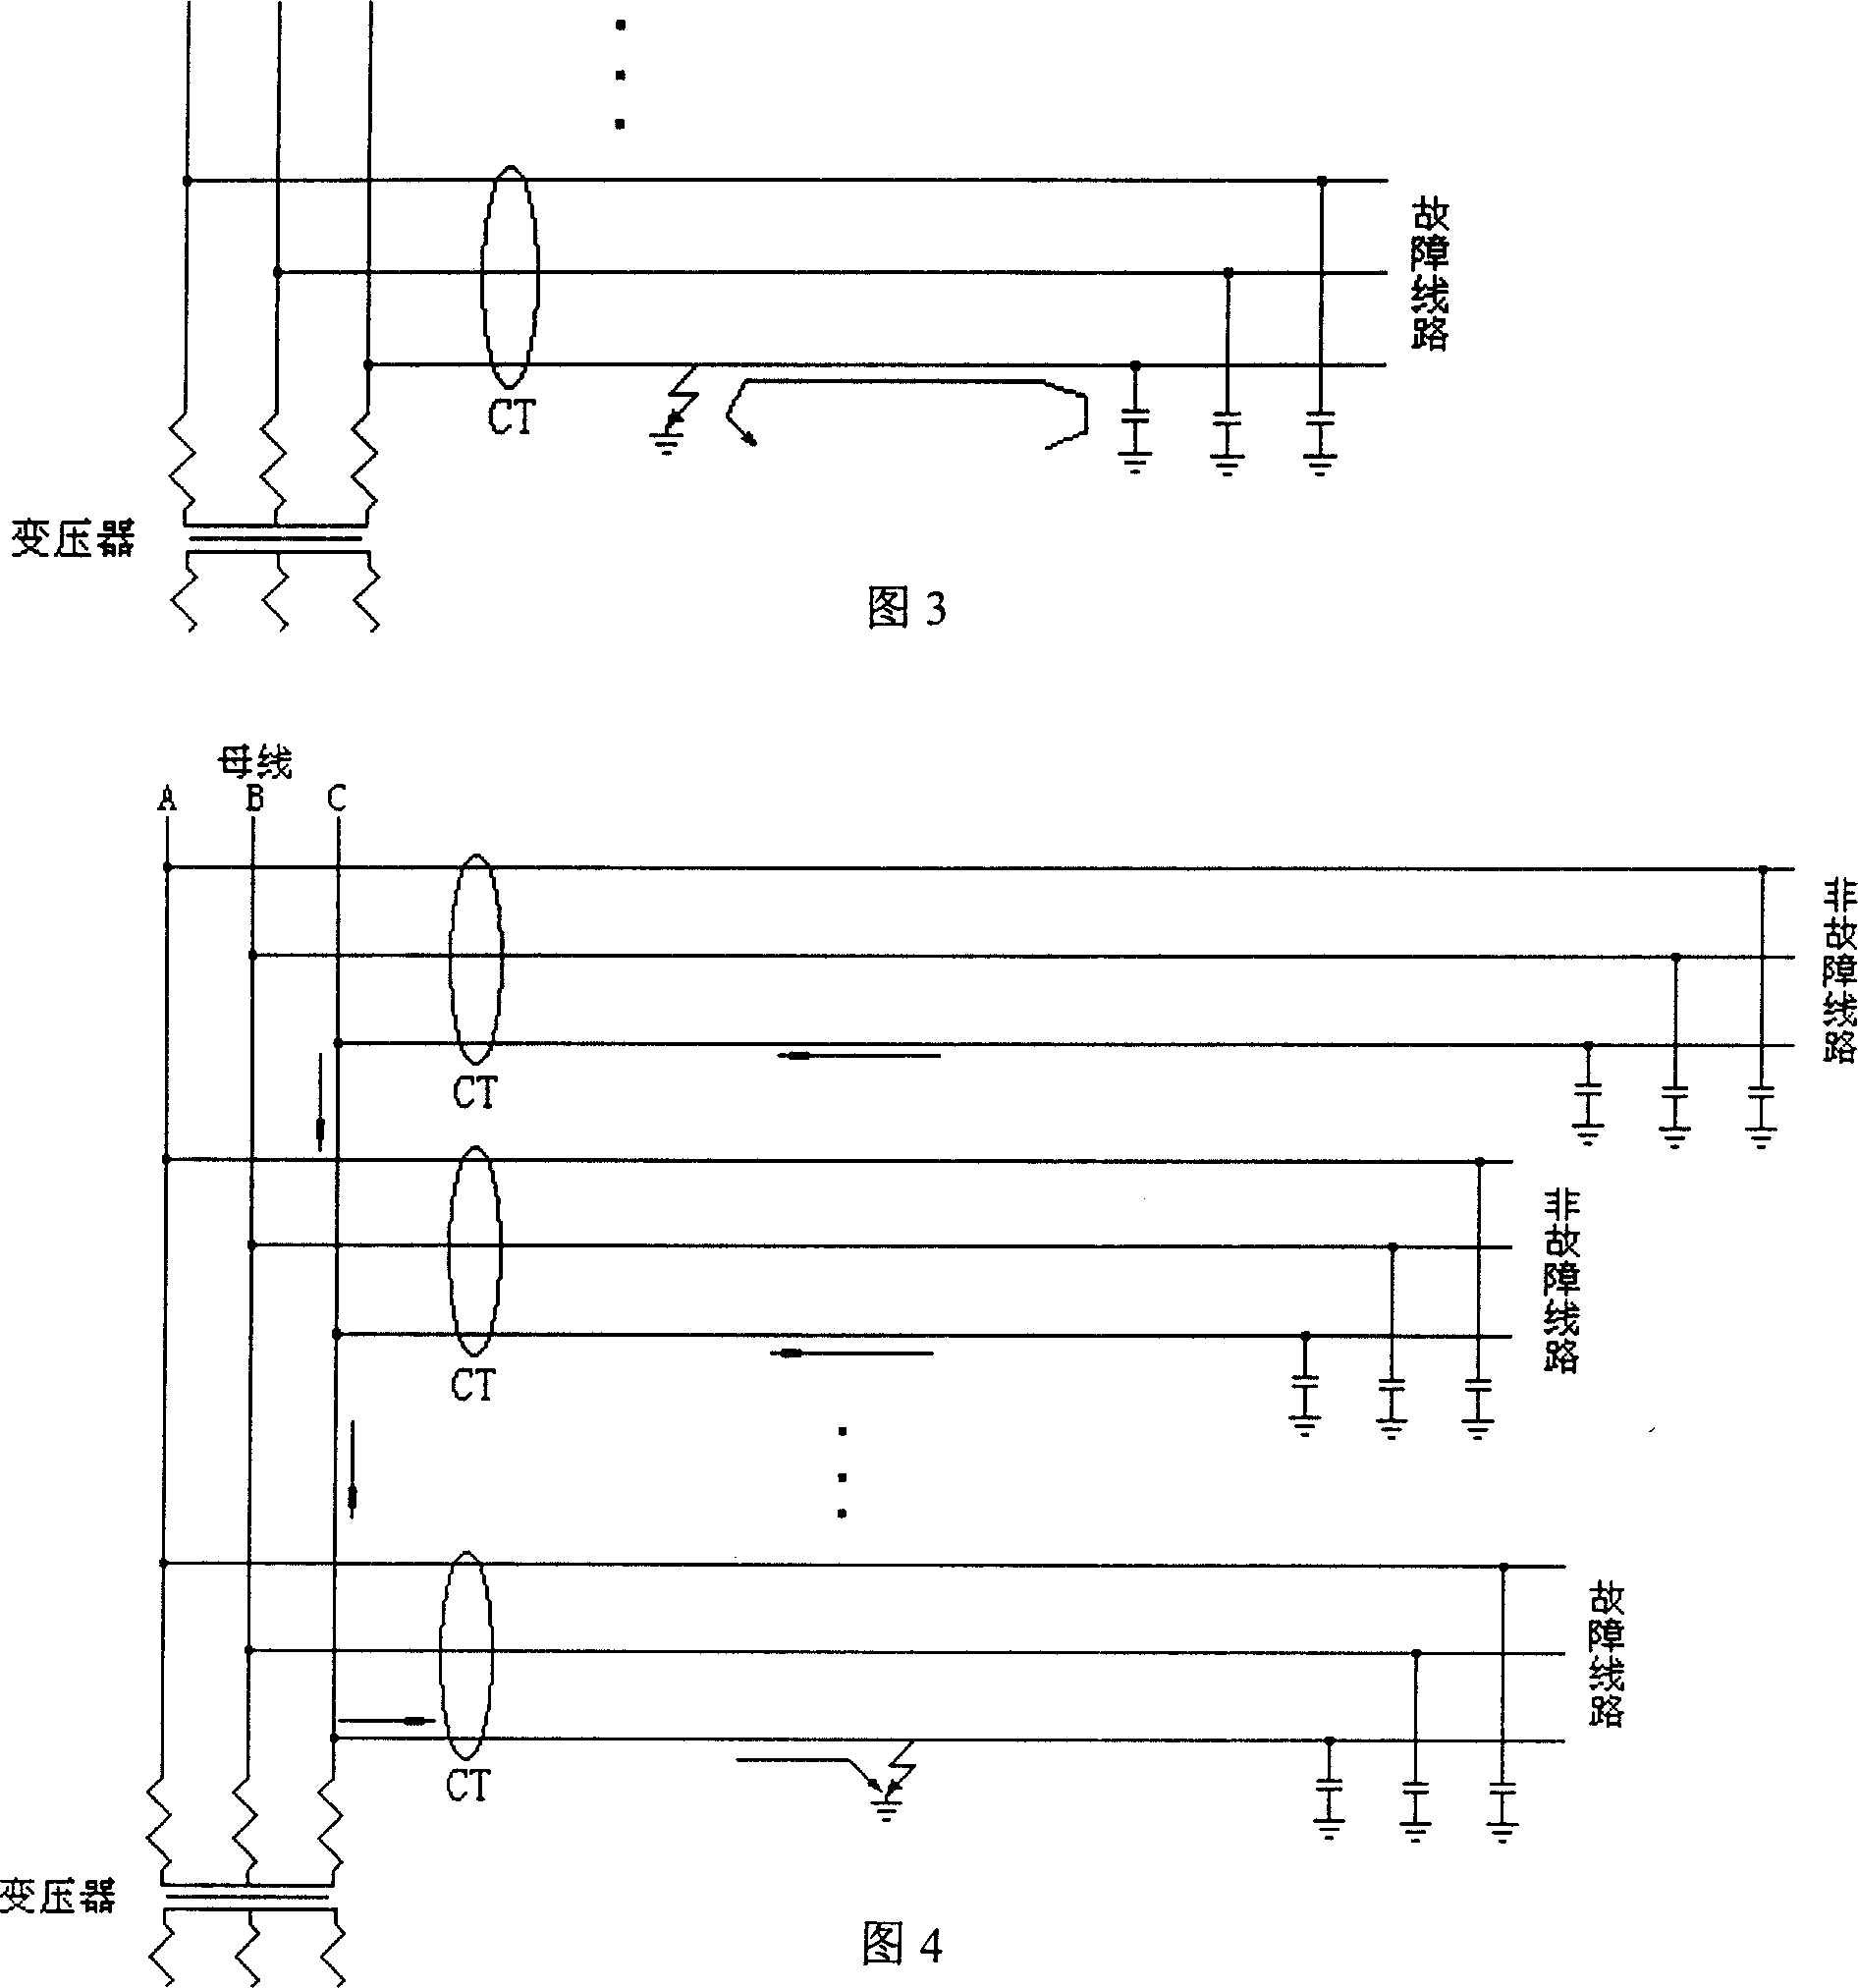 Route selection method for single-phase grounded malfunction in grounded system of low current